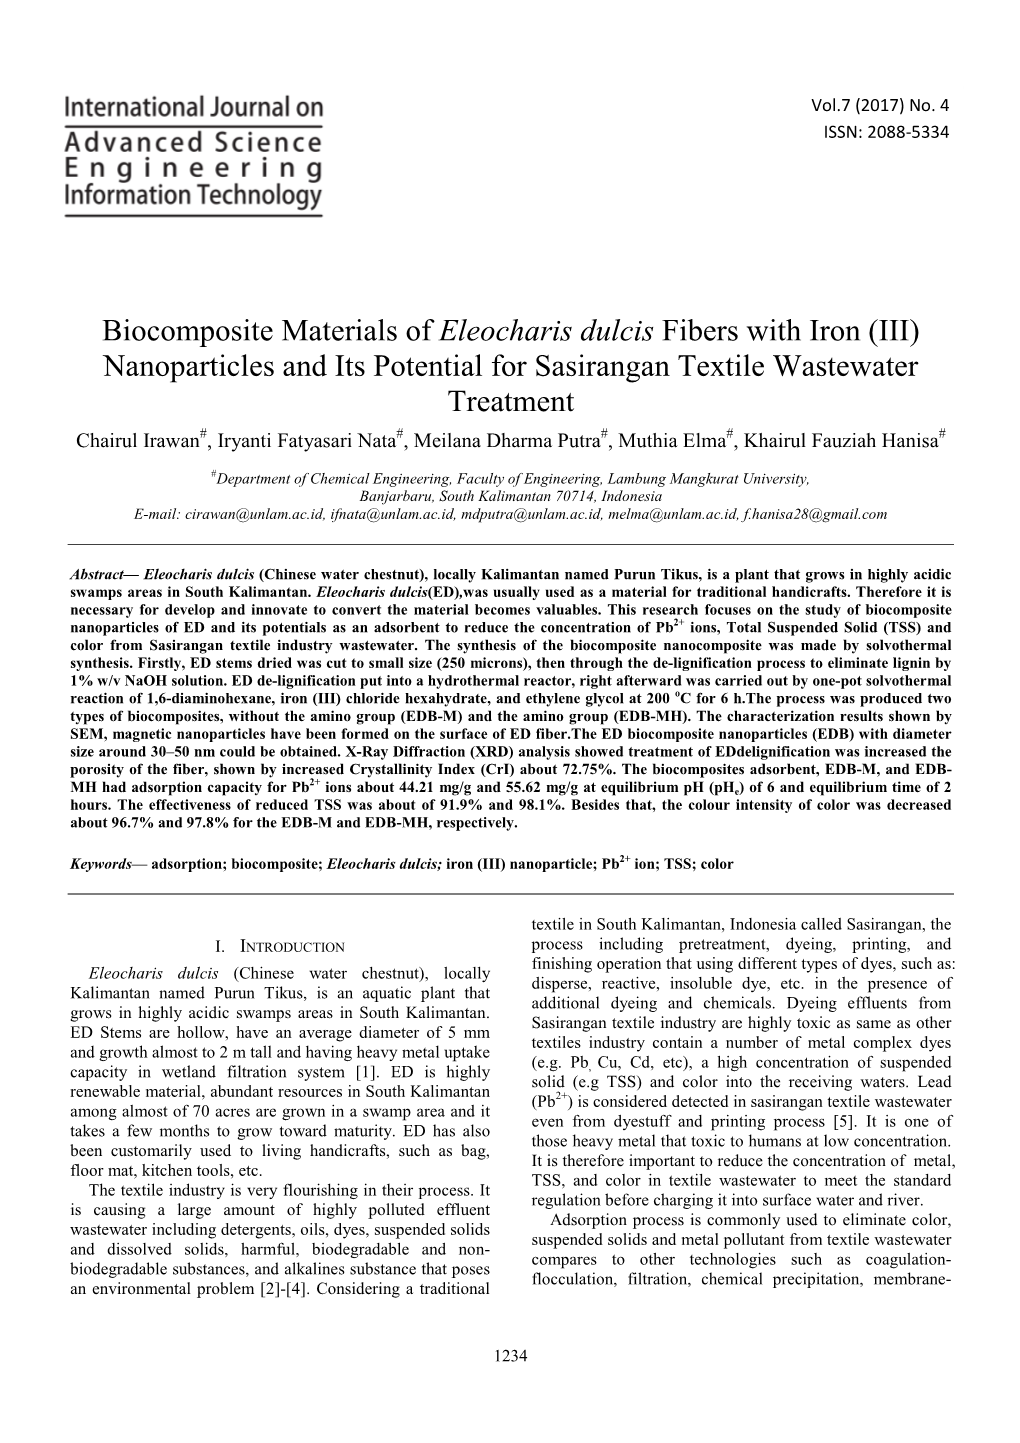 Biocomposite Materials of Eleocharis Dulcis Fibers with Iron (III) Nanoparticles and Its Potential for Sasirangan Textile Wastewater Treatment